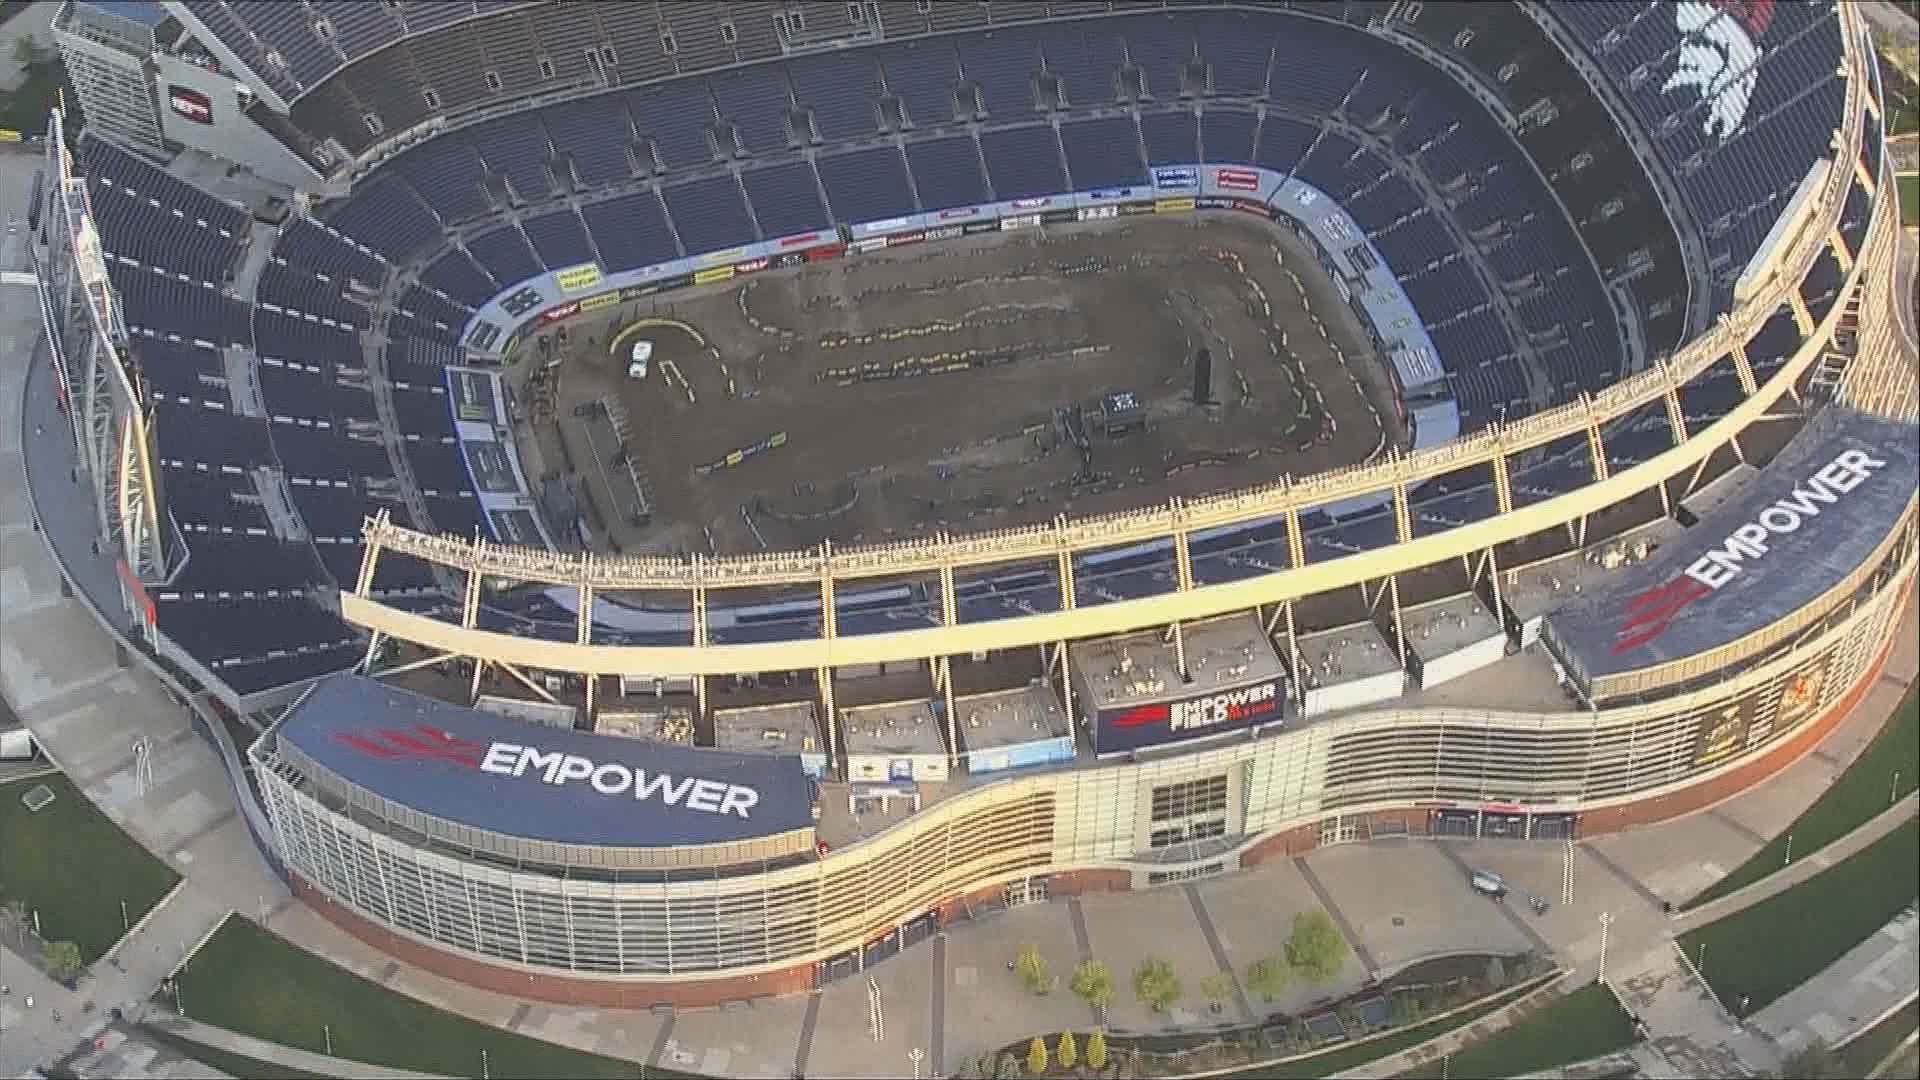 AMA Supercross returns to Denver this weekend. The supercross series will race at Empower Field at Mile High.